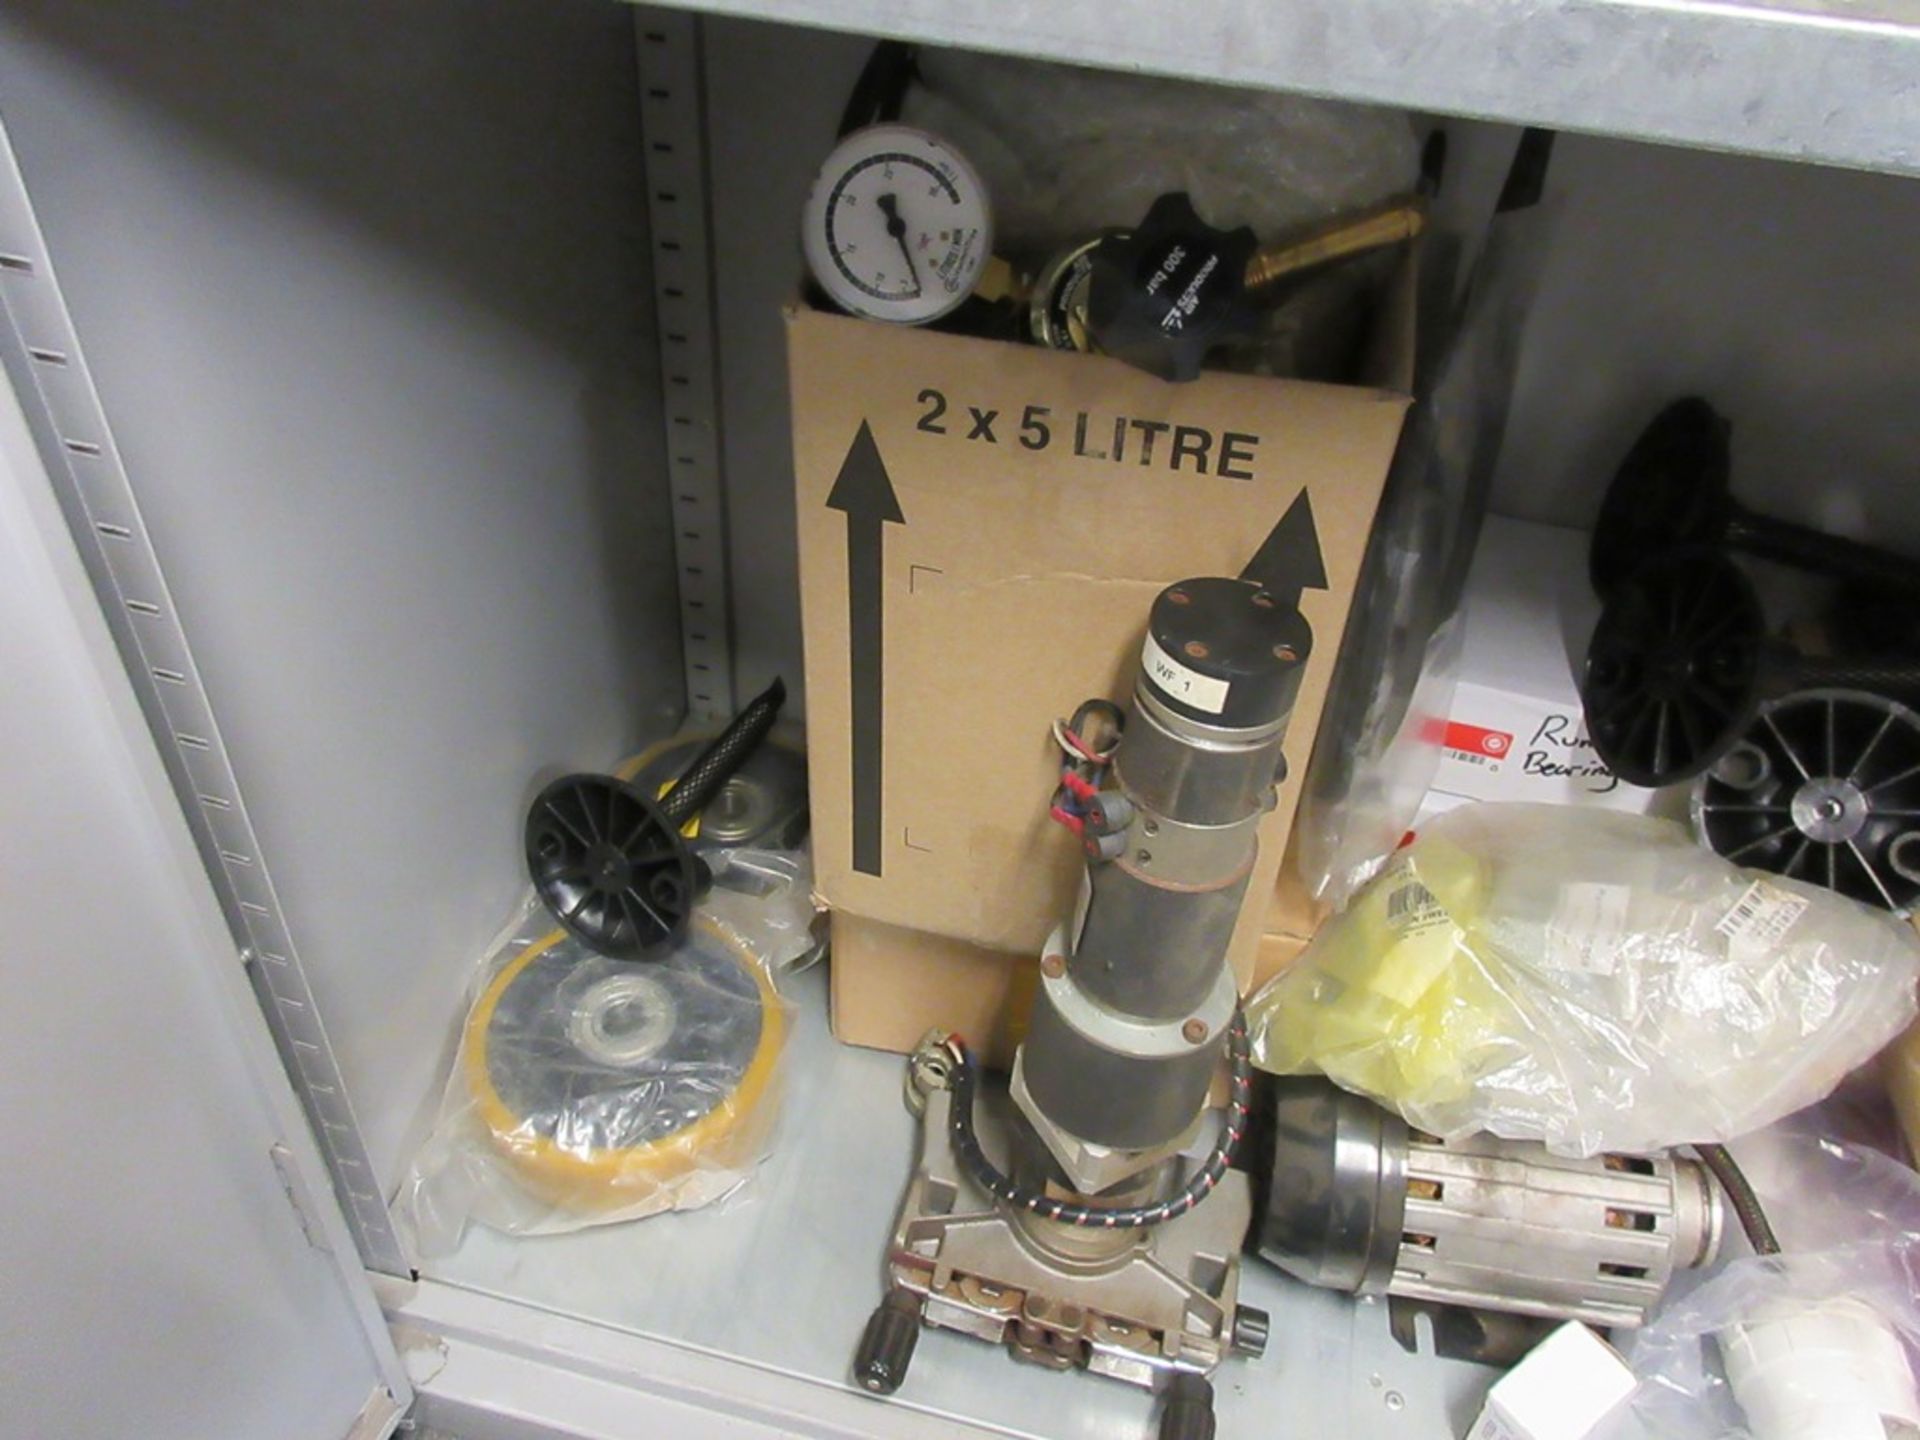 Cupboard and contents including gas regulators, power supply units, electrode connectors, janes, - Image 8 of 9